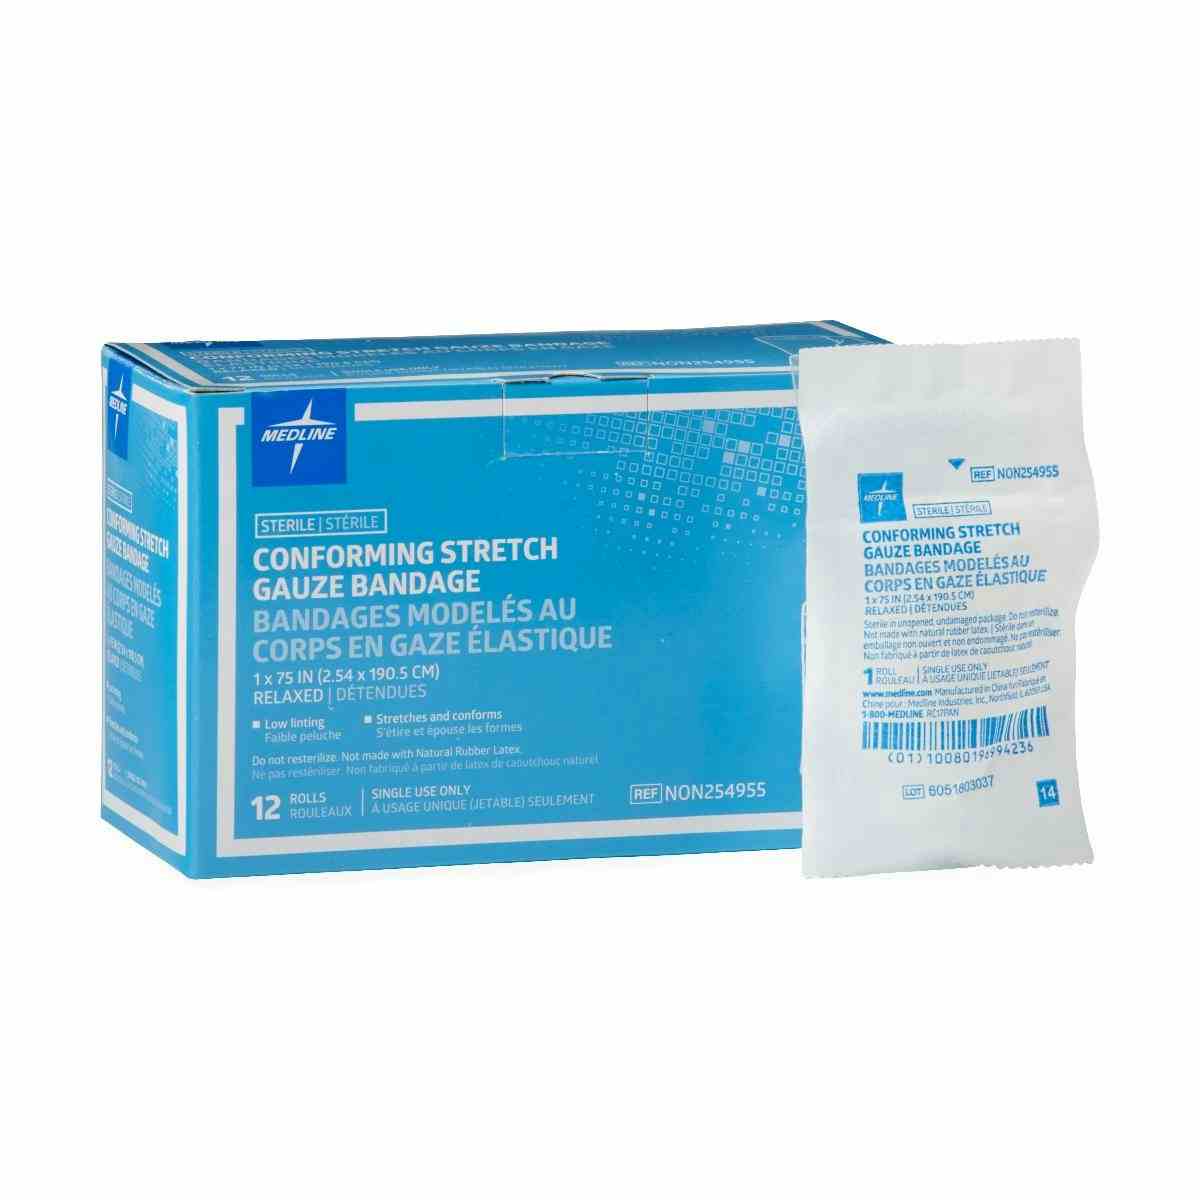 Medline Conforming Stretch Gauze Bandages, Heavy Weight, NON254955Z, 1" X 75" - Box of 12